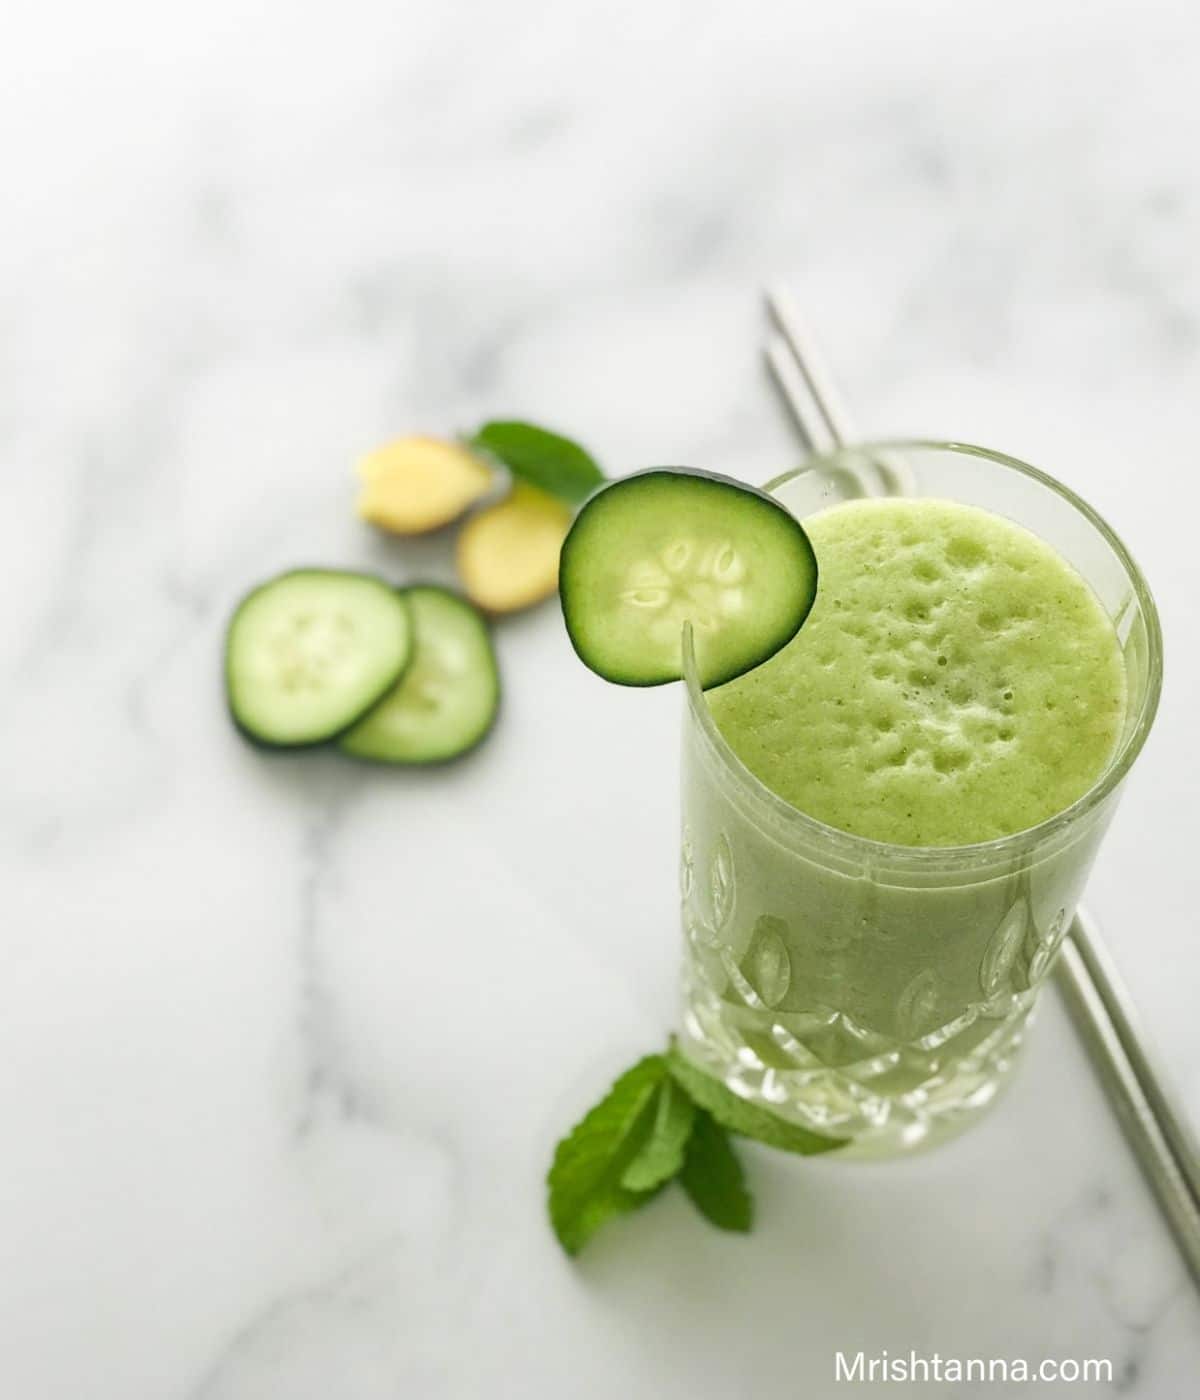 A tall glass is filled with smoothie and cucumber slices are placed on the side